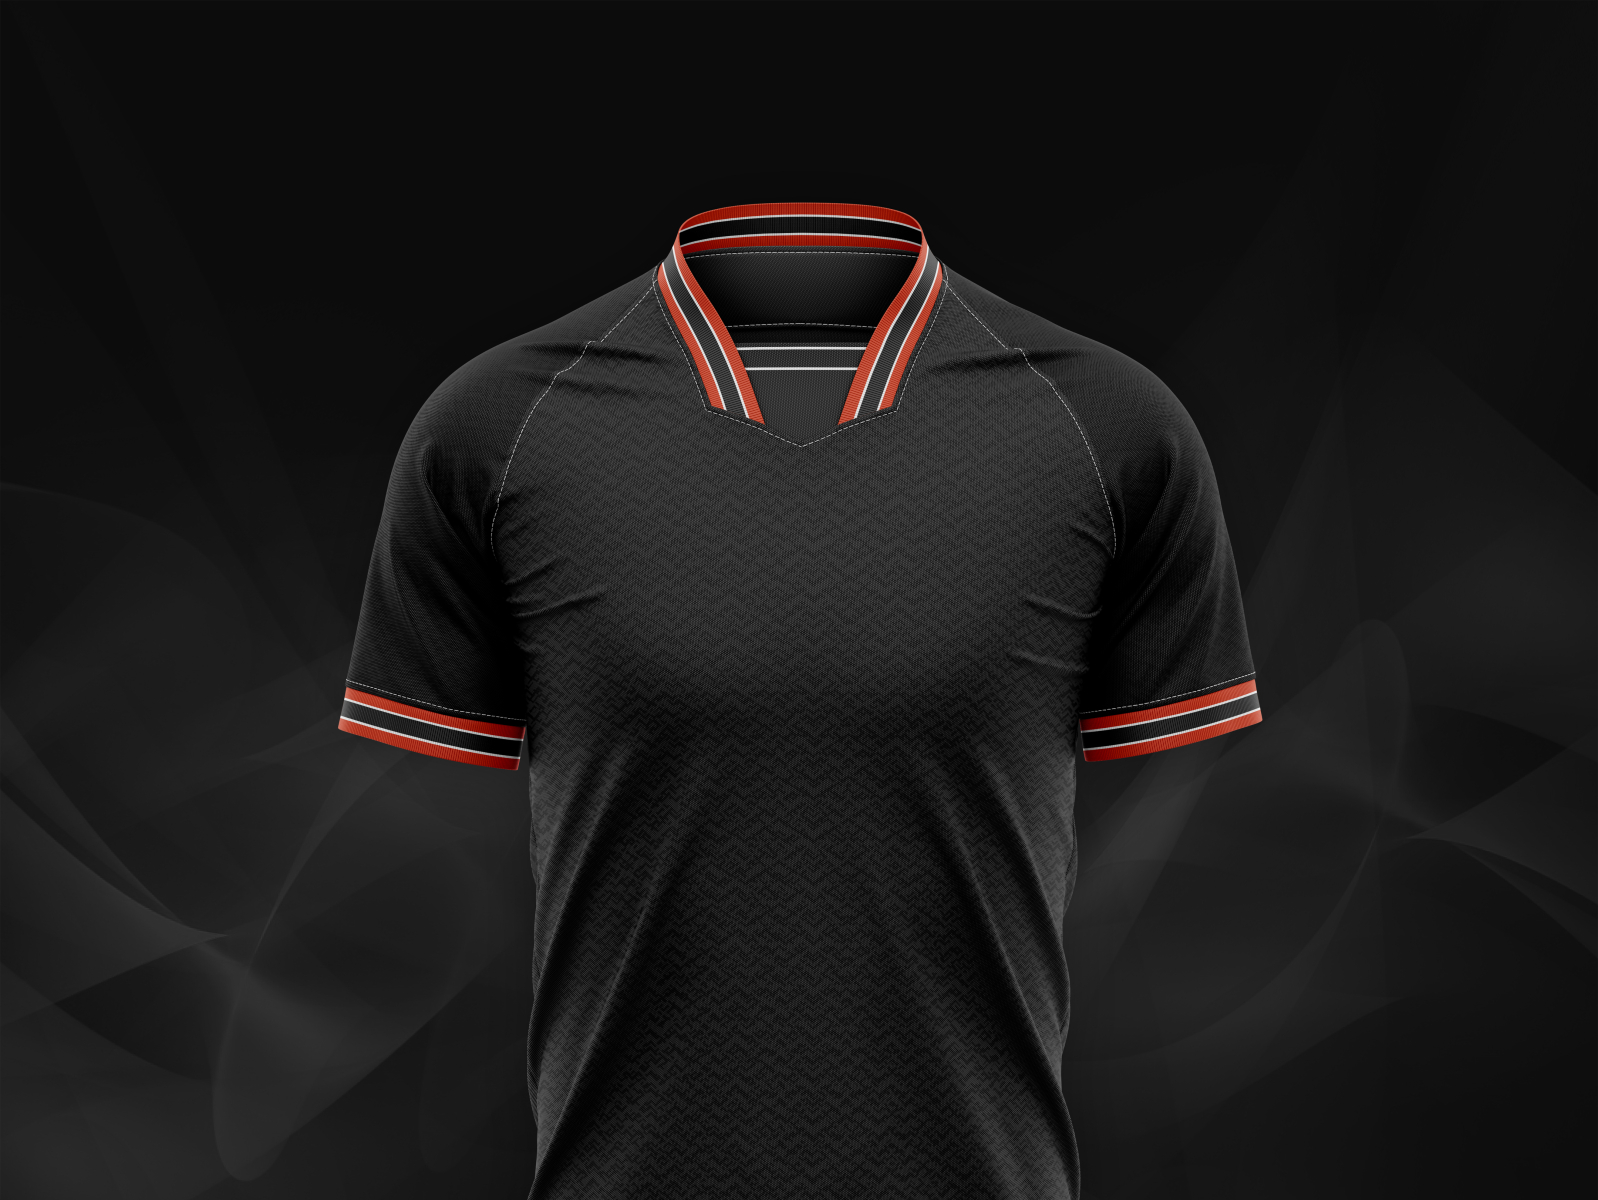 Nike Soccer Jersey Mockup by CG Tailor on Dribbble